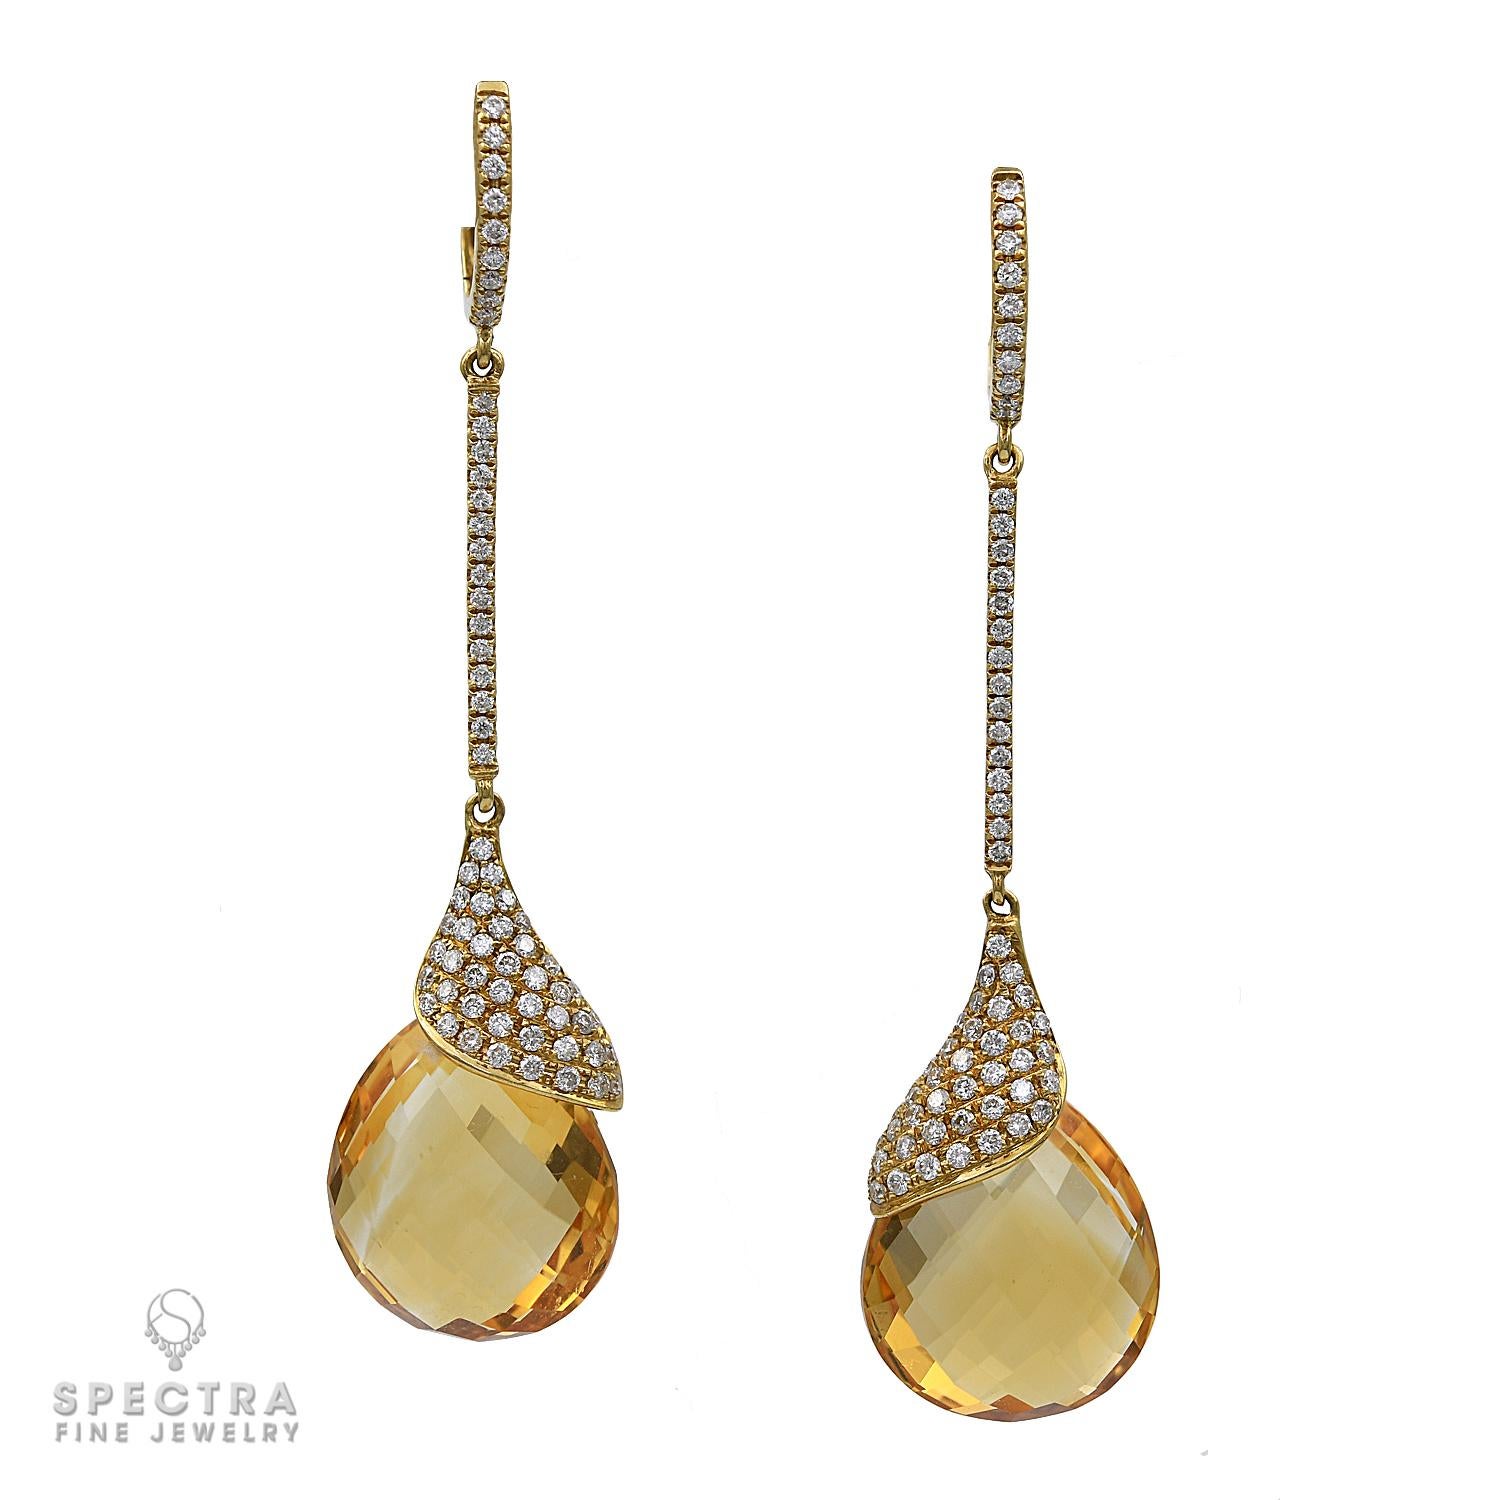 The fluid elegance of these Contemporary Citrine Diamond Pavé Drop Earrings, made in the 21st century, brings to mind the ornamental style that flourished between about 1890 and 1910 throughout Europe and the United States, characterized by its use